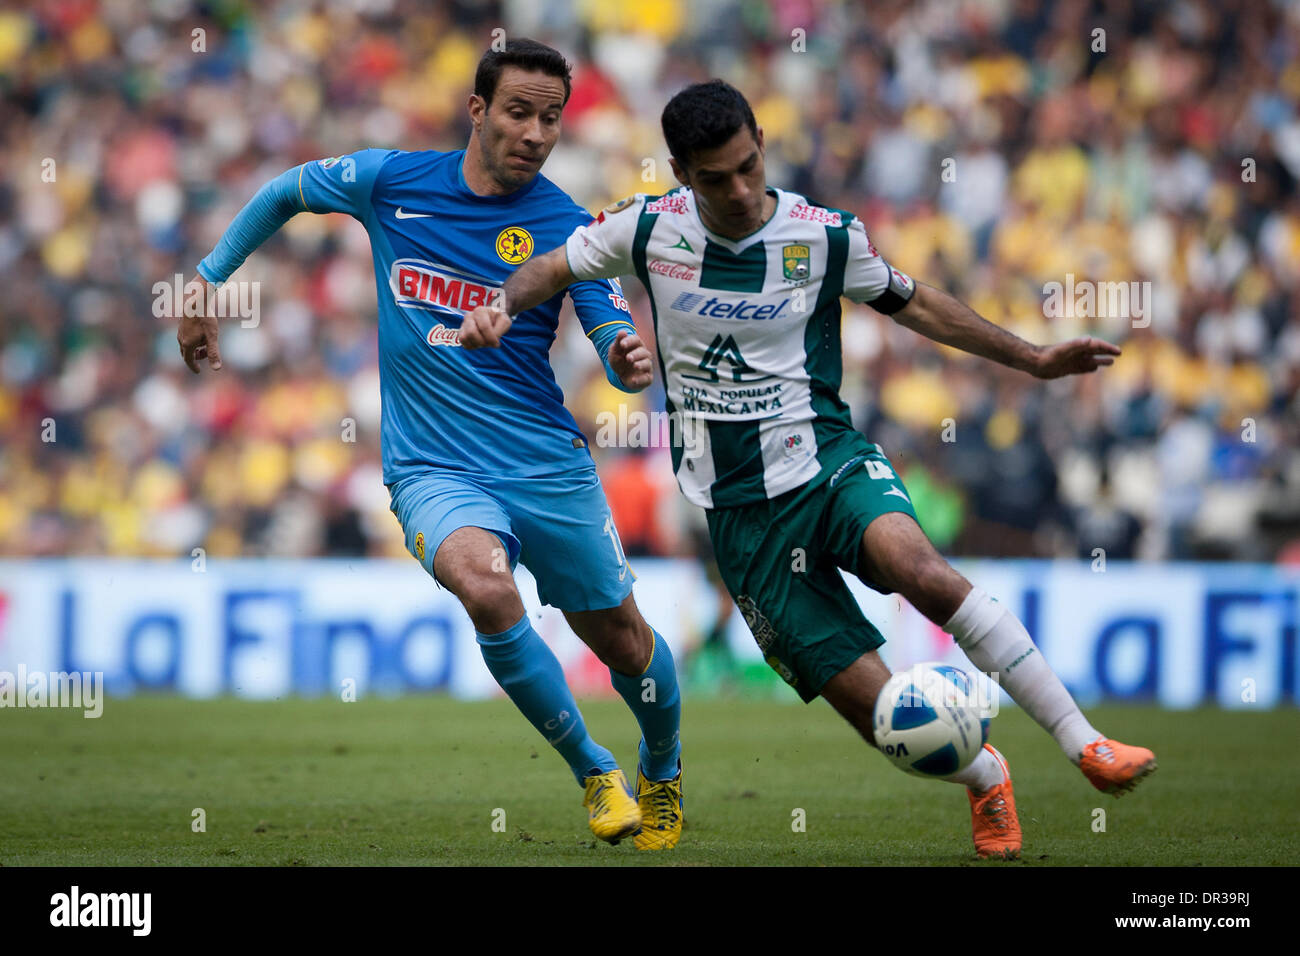 Mexico City, Mexico. 19th Jan, 2014. America's Luis Gabriel Rey (L) vies for the ball with Leon's Rafael Marquez during their match of the MX League Closing Tournament 2014, in Mexico City, capital of Mexico, on Jan. 18, 2014. Credit:  Pedro Mera/Xinhua/Alamy Live News Stock Photo